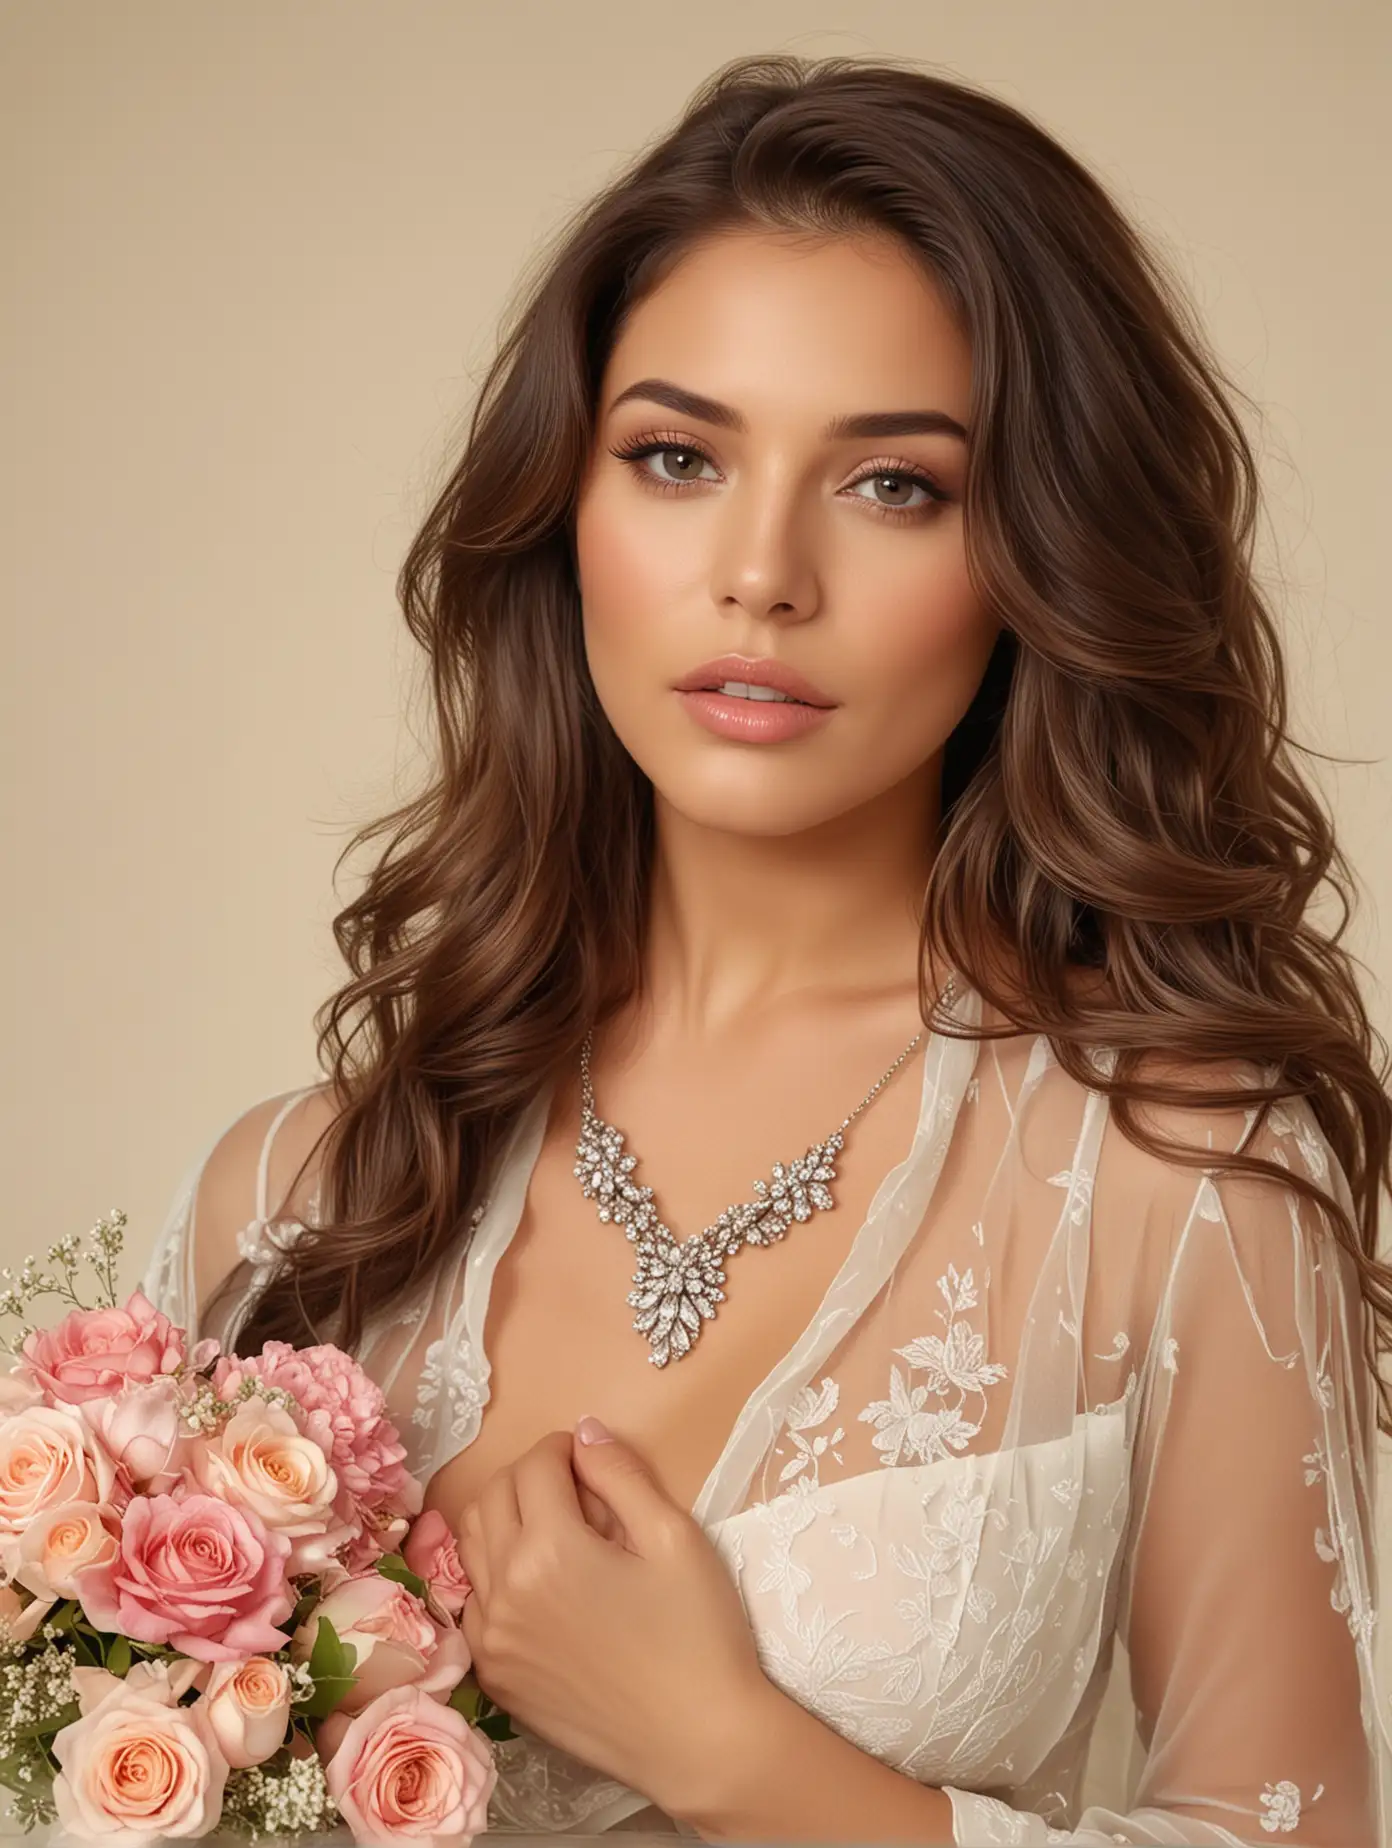 Elegant Woman with Bouquet on Beige Background